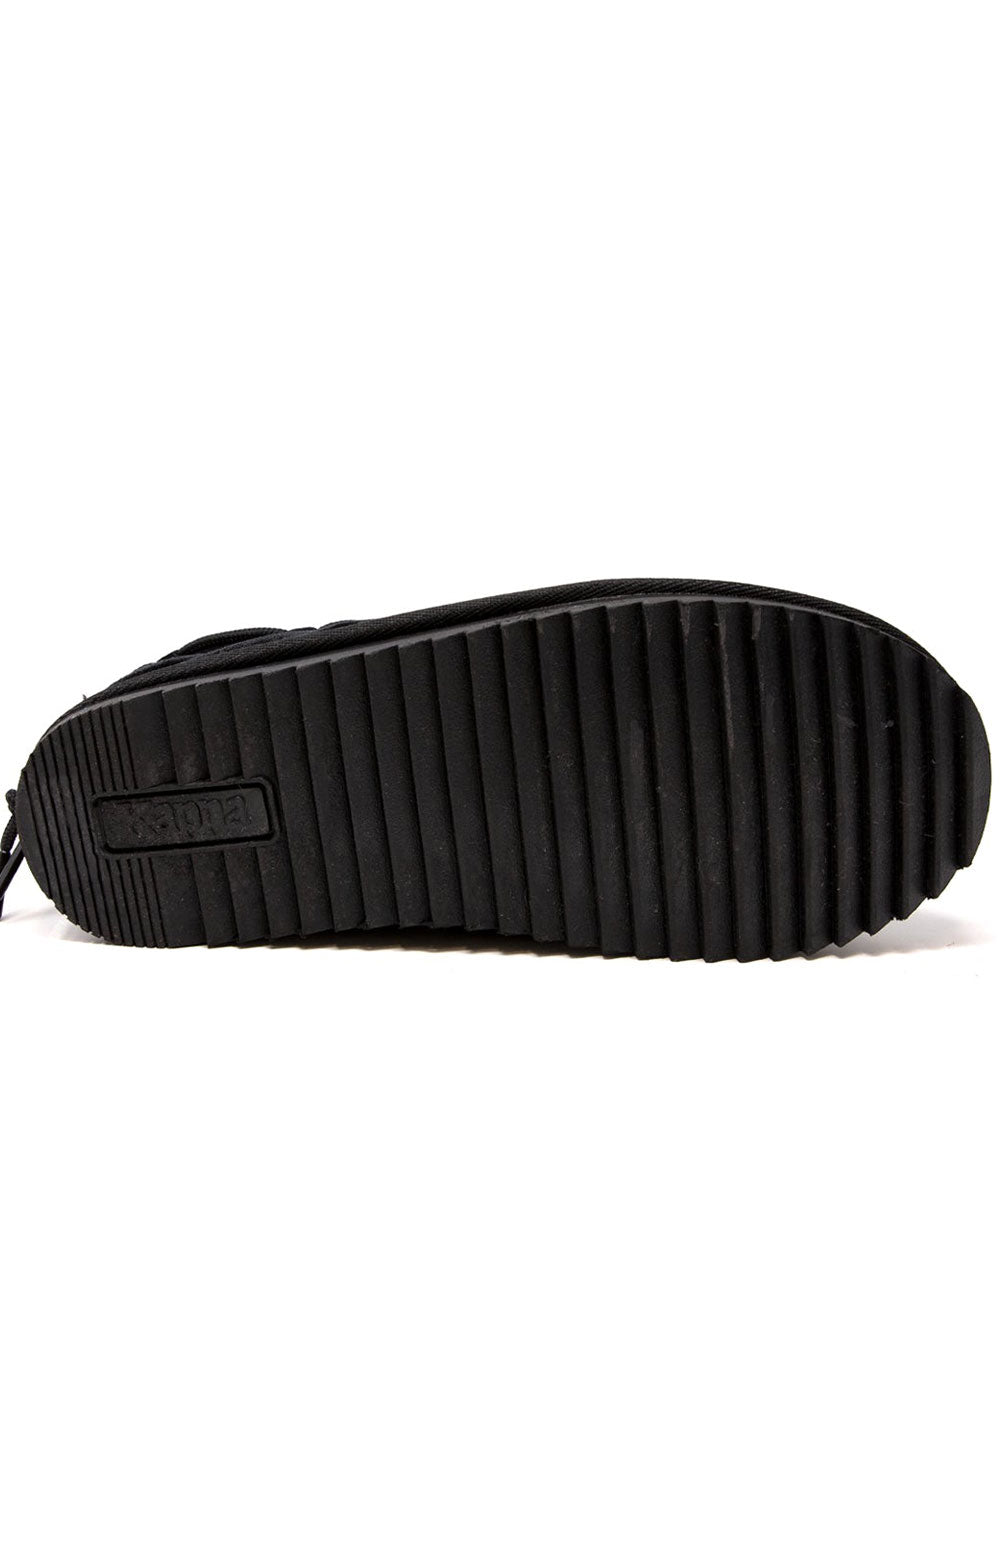 (351859W) Authentic Mule 3 Slippers - Black/White